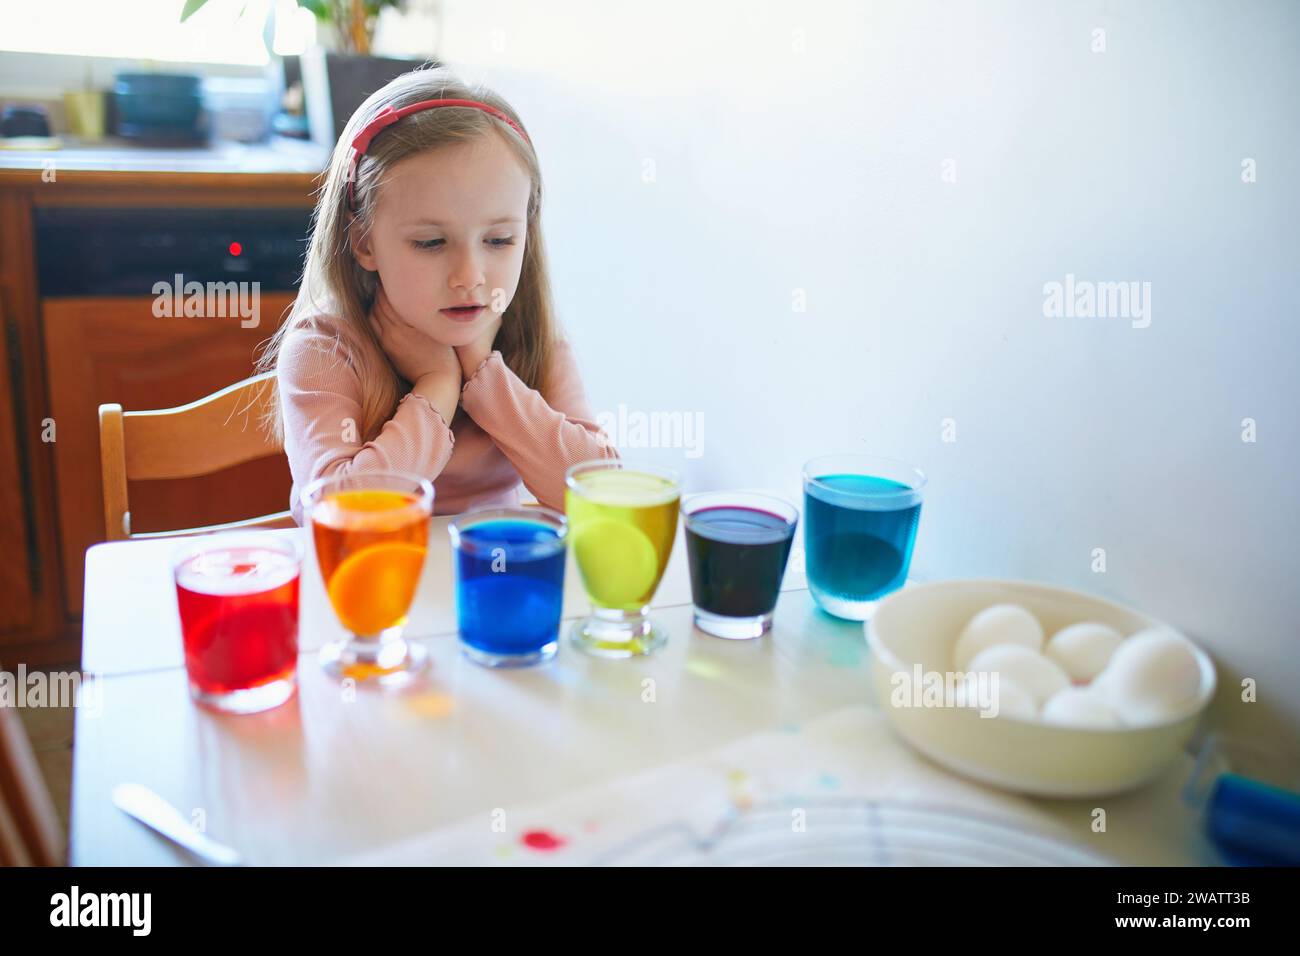 Adorable preschooler girl dyeing Easter eggs at home. Child painting colorful eggs for Easter hunt. Kid getting ready for Easter celebration. Family t Stock Photo